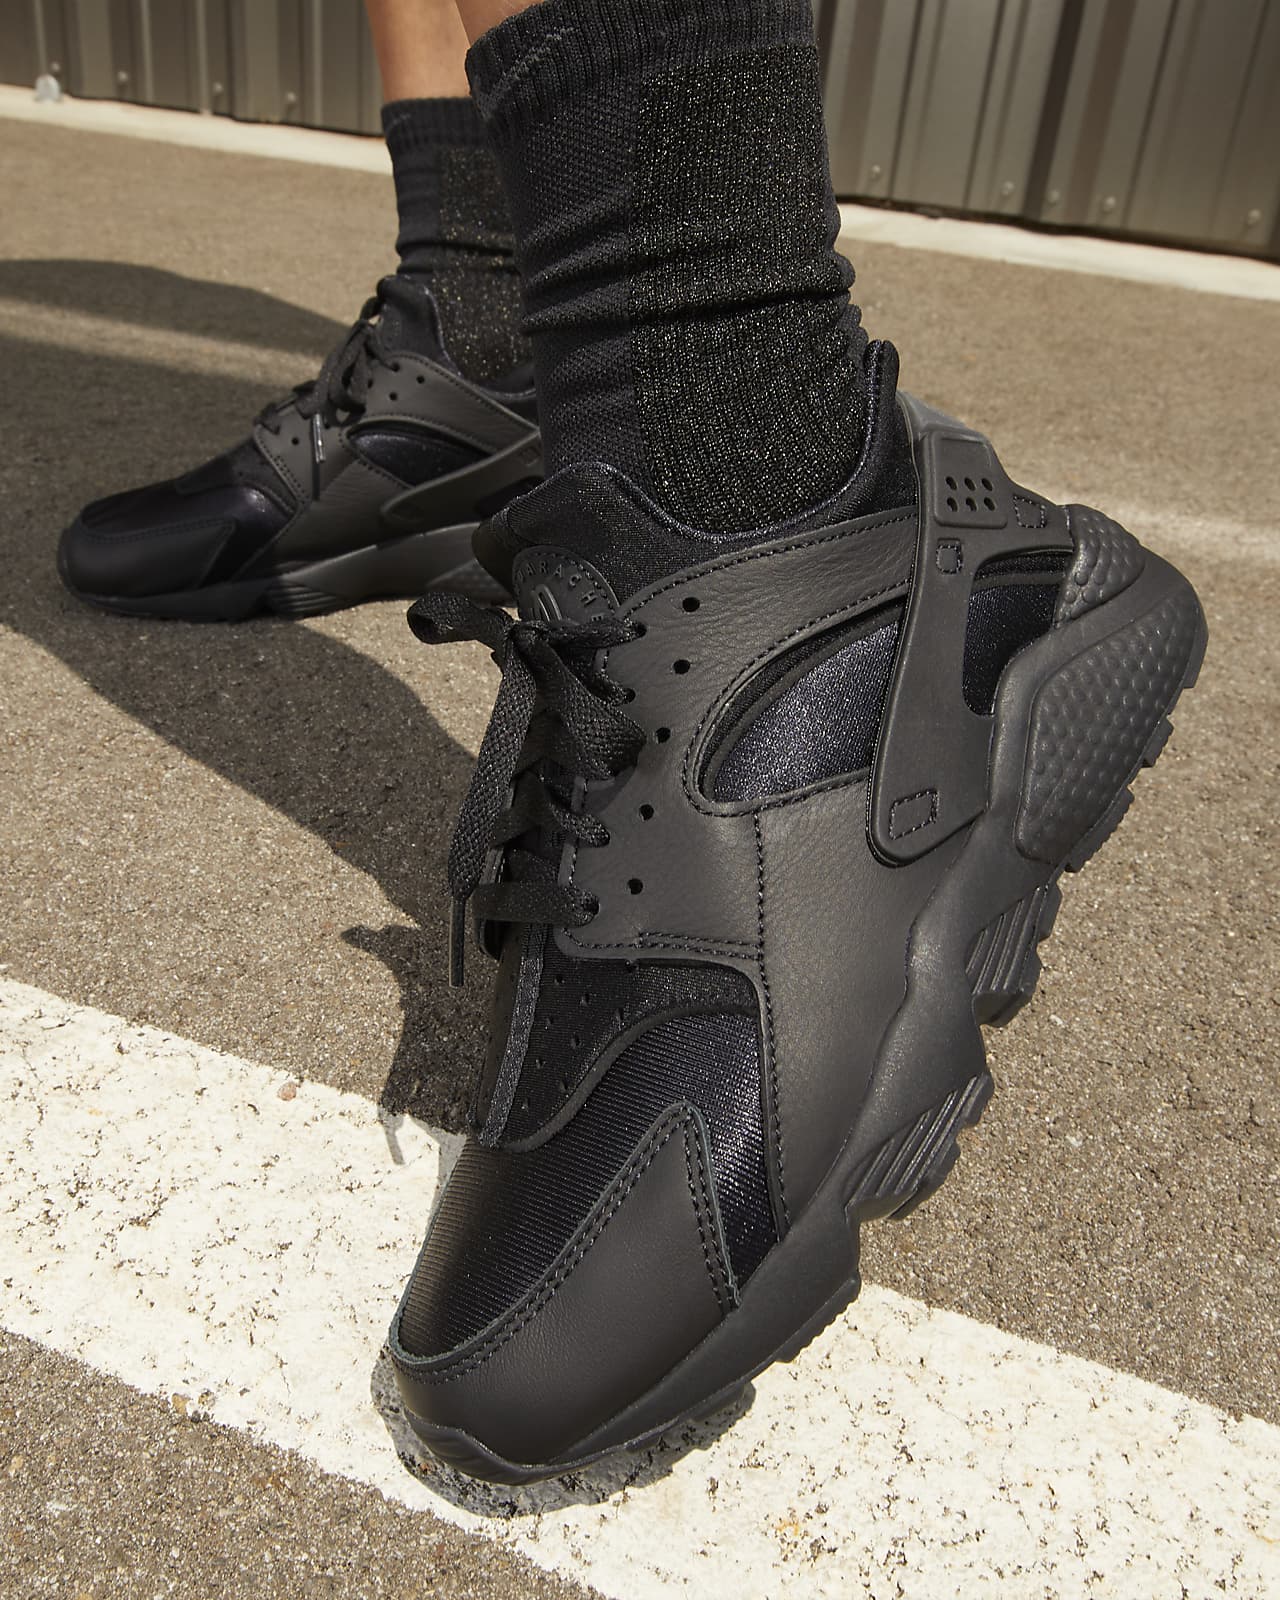 The Next Nike Huarache Does The OG Model Justice